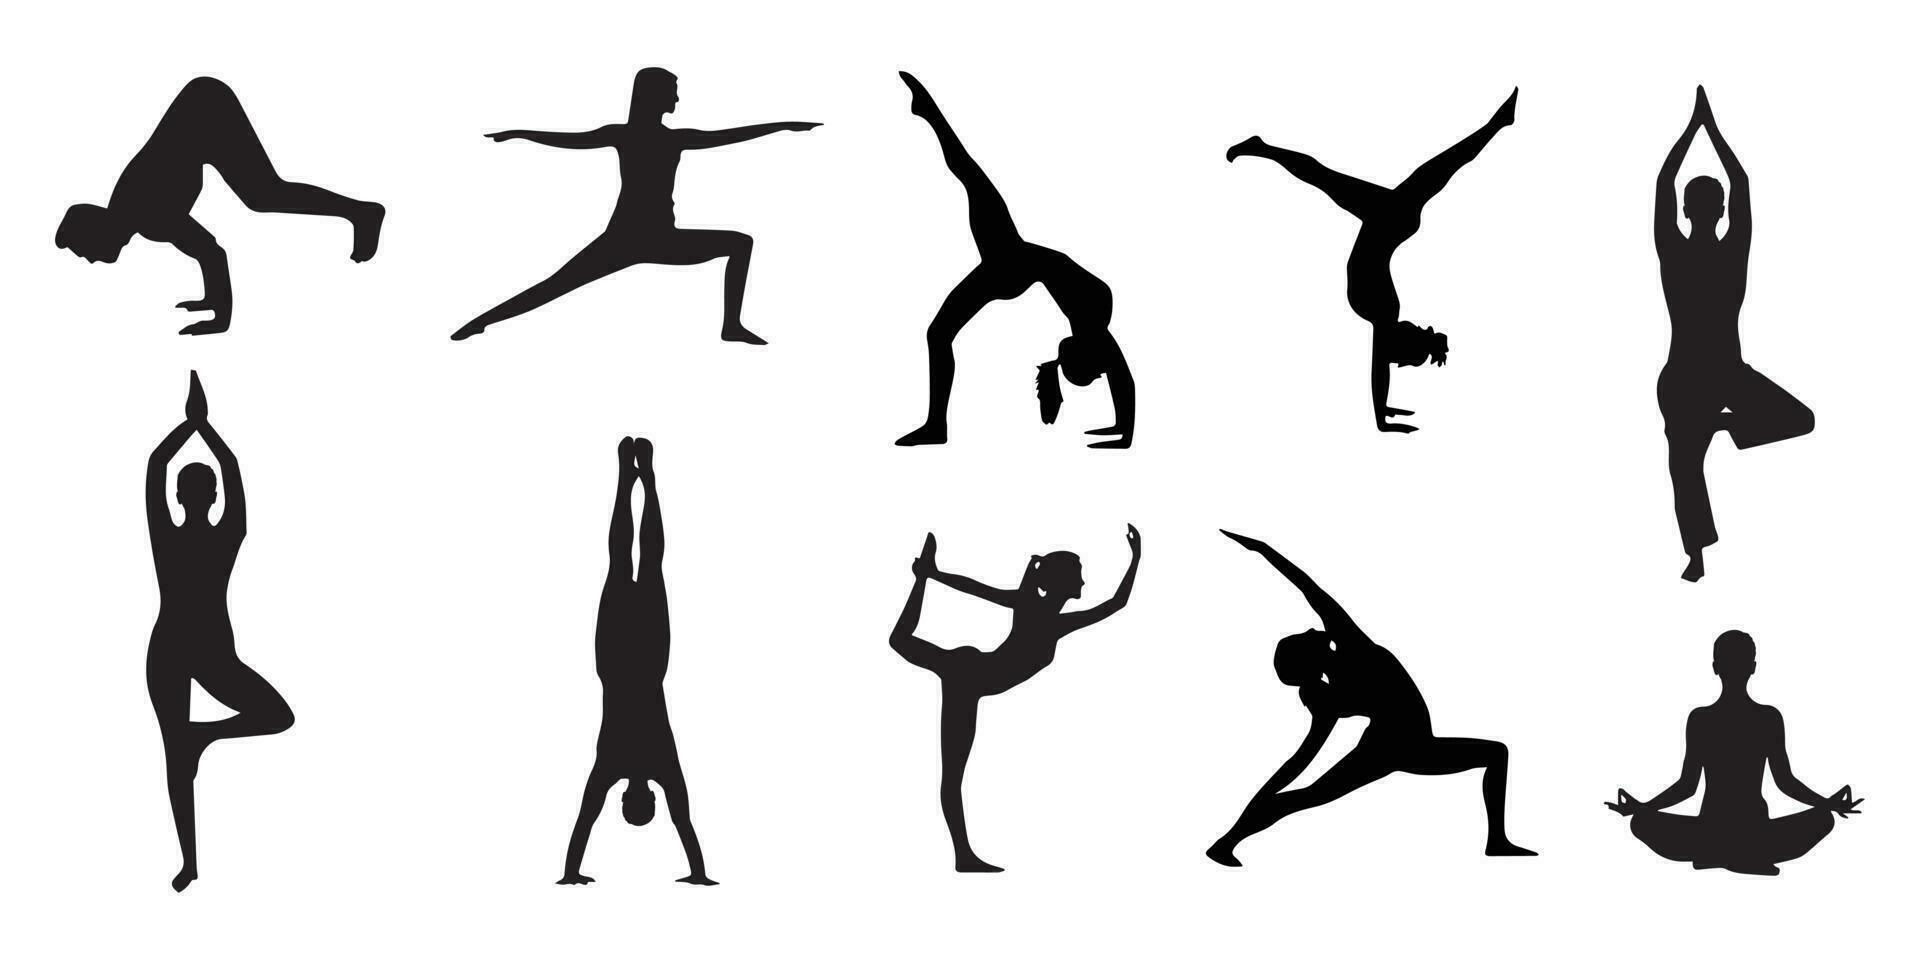 yoga poses all different arts vector file